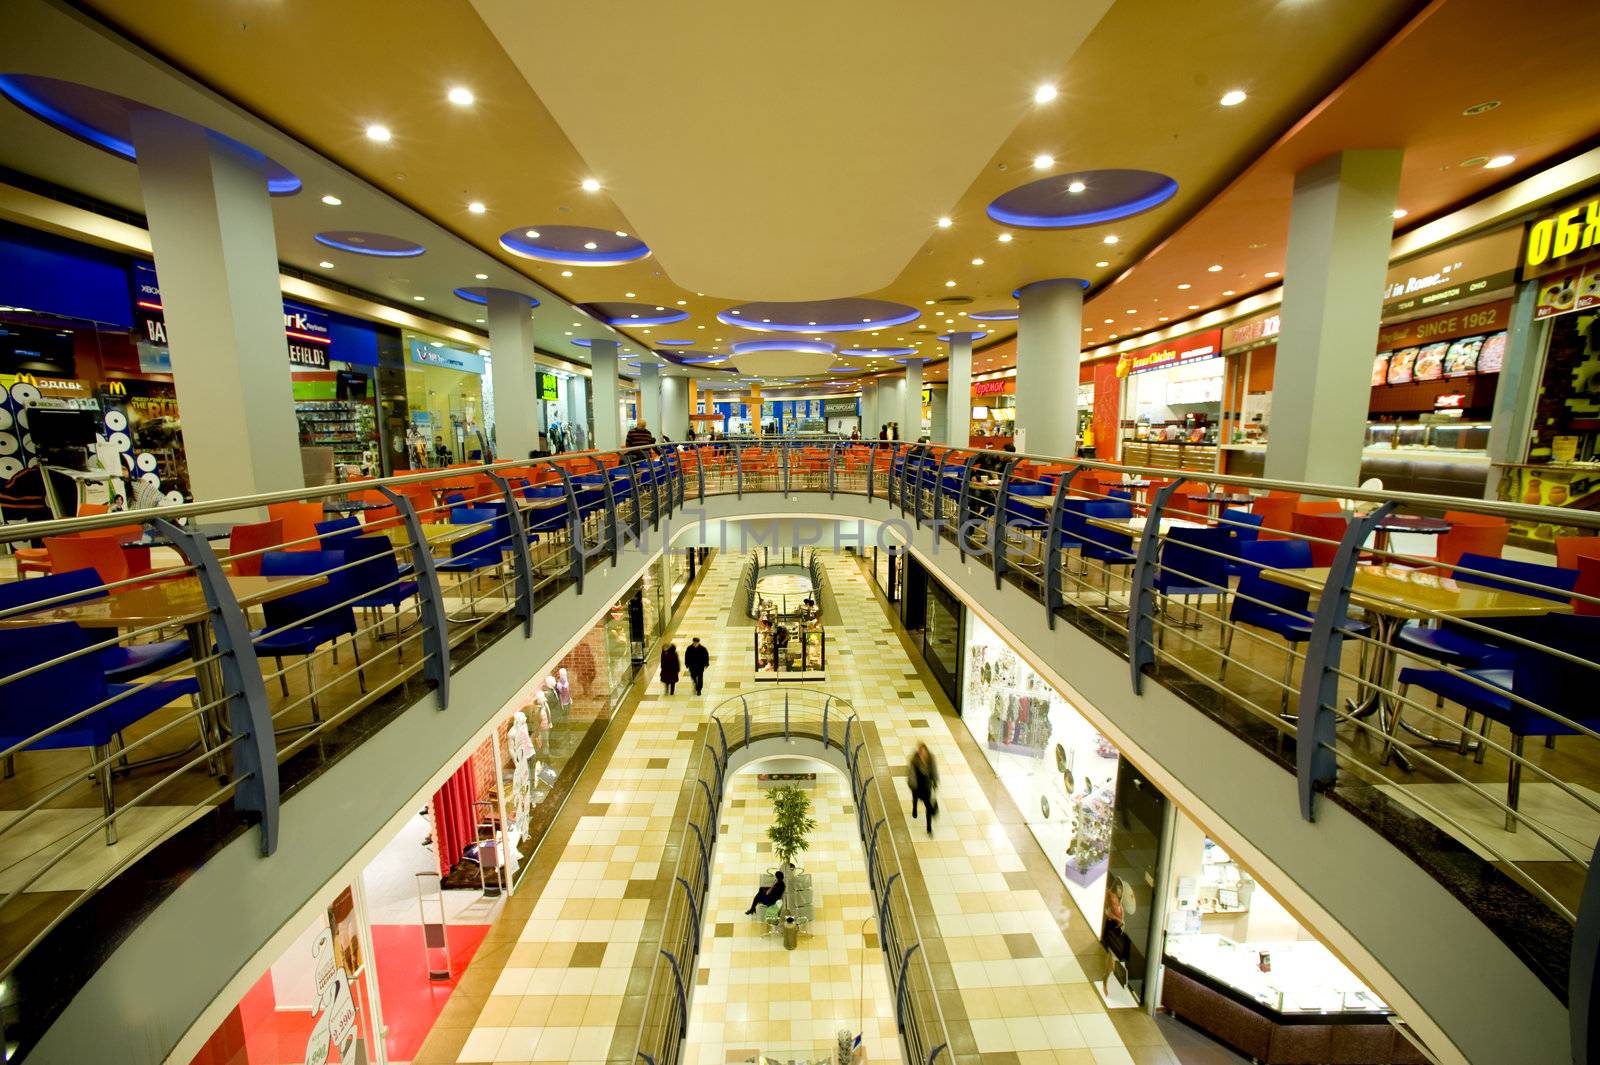 New shopping mall in Moscow, Russia November 2011